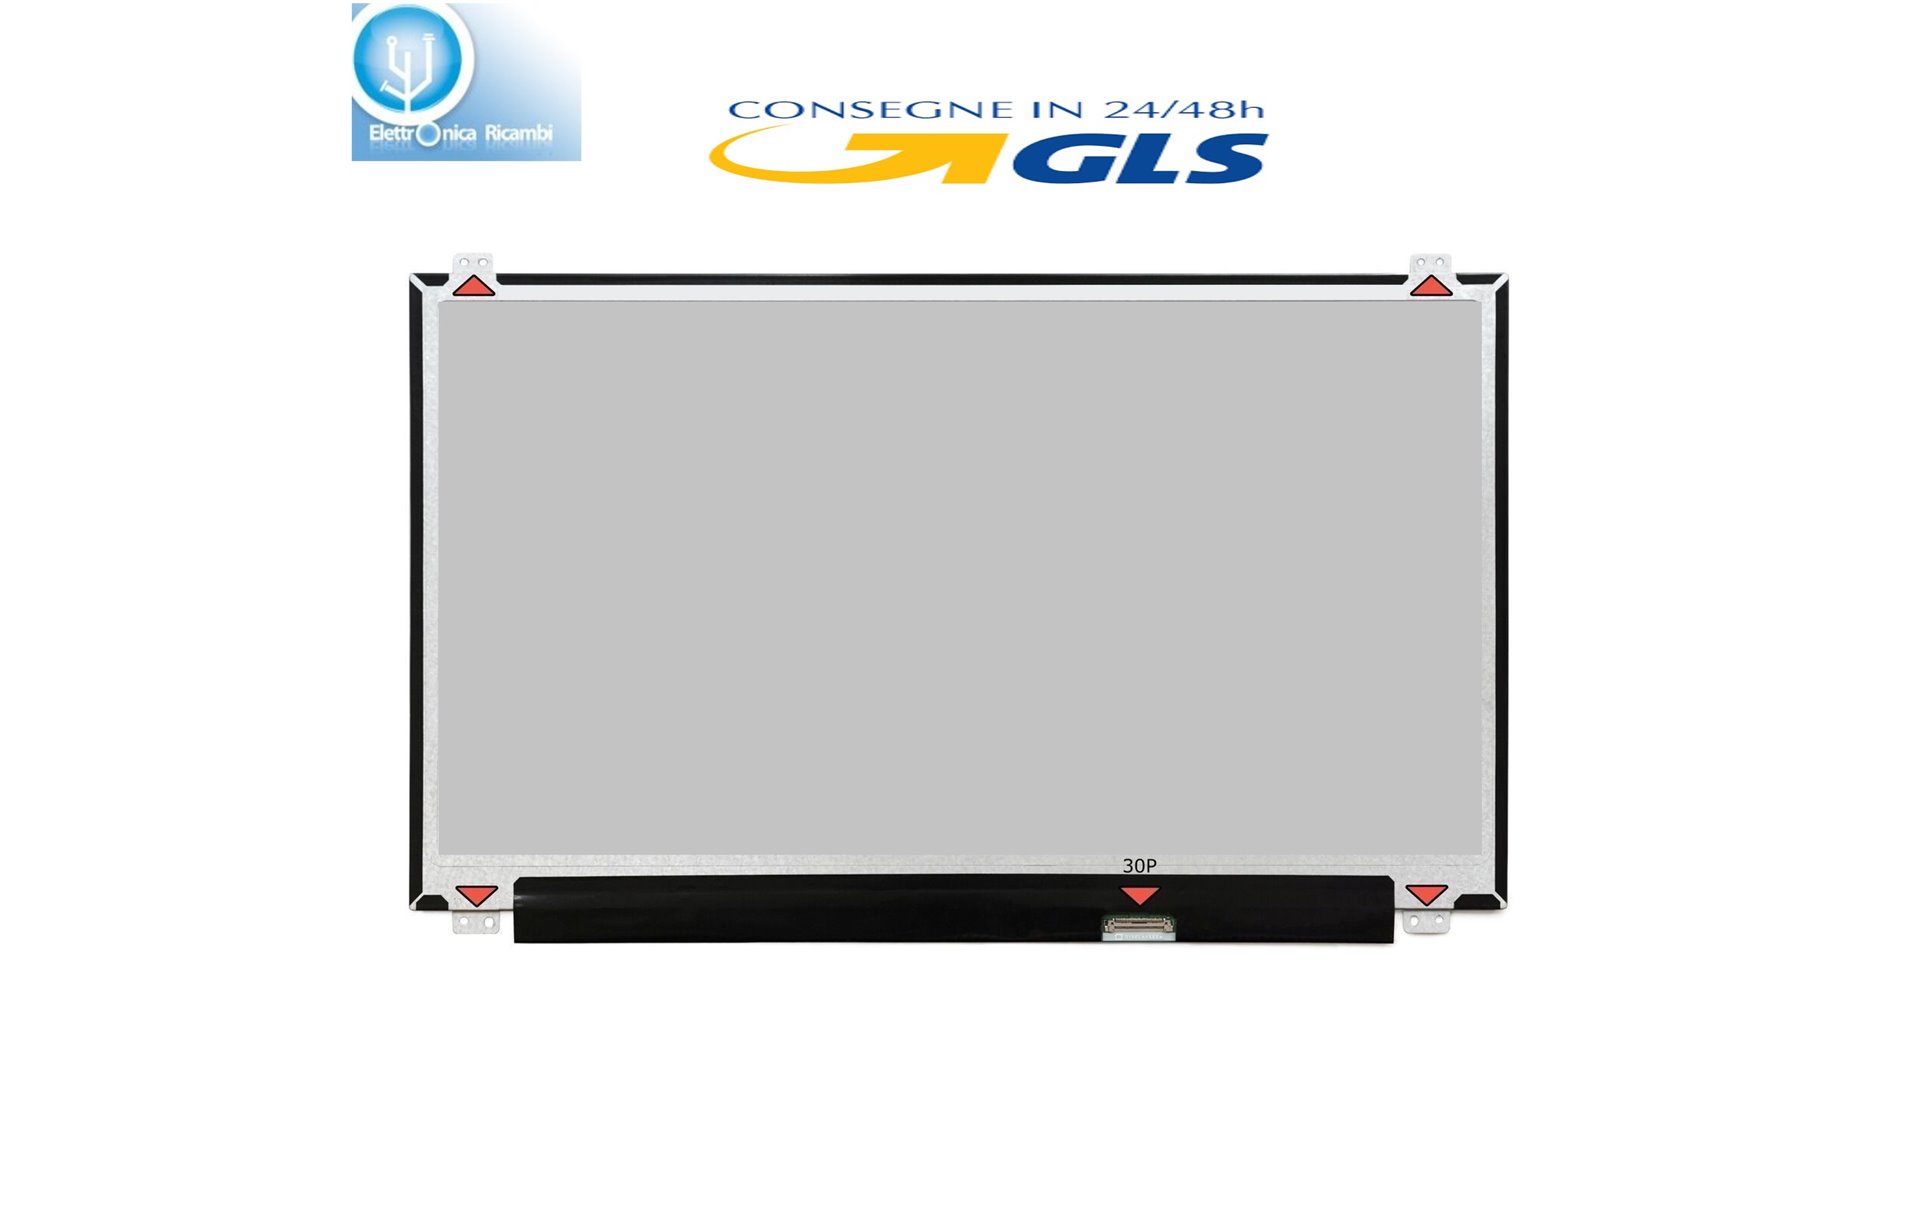 DISPLAY LCD ACER E5-573G-50W6 15.6 WideScreen (13.6"x7.6") LED"